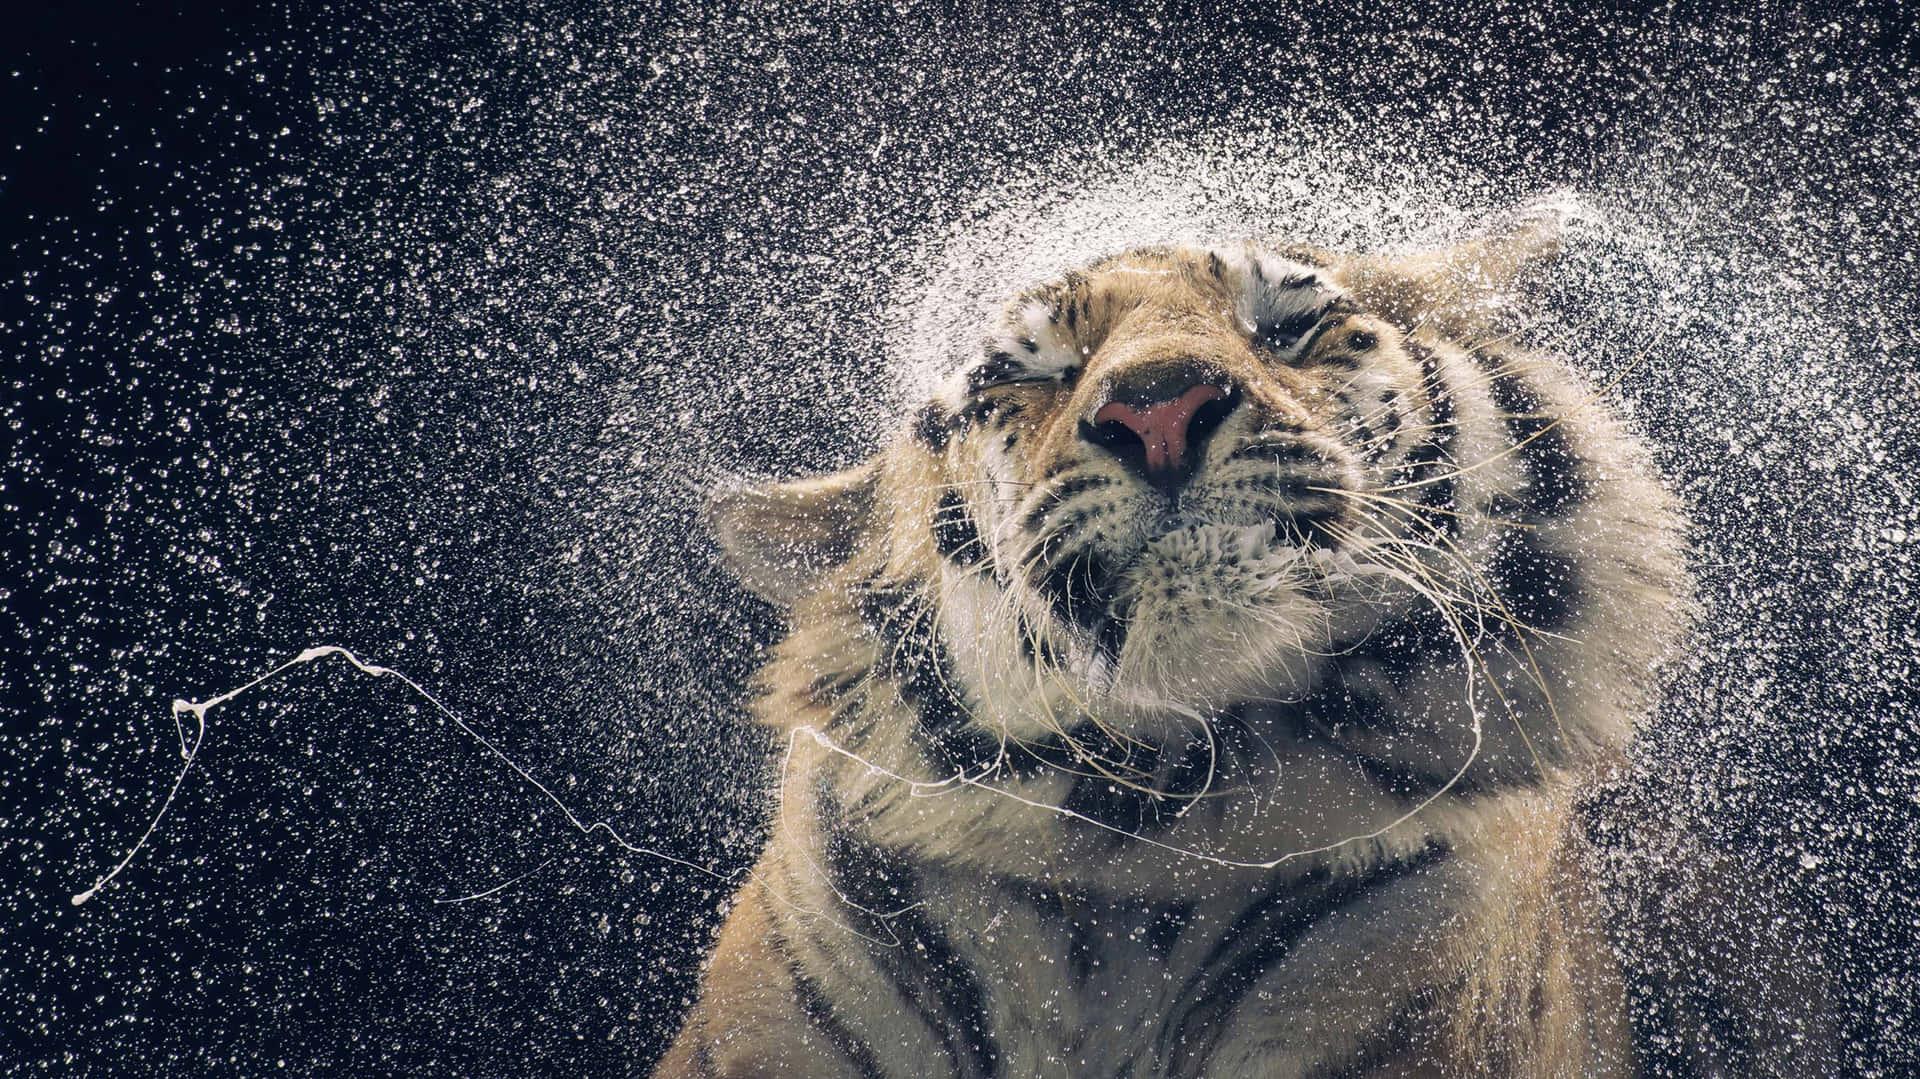 A Tiger Is Being Sprayed With Water Wallpaper